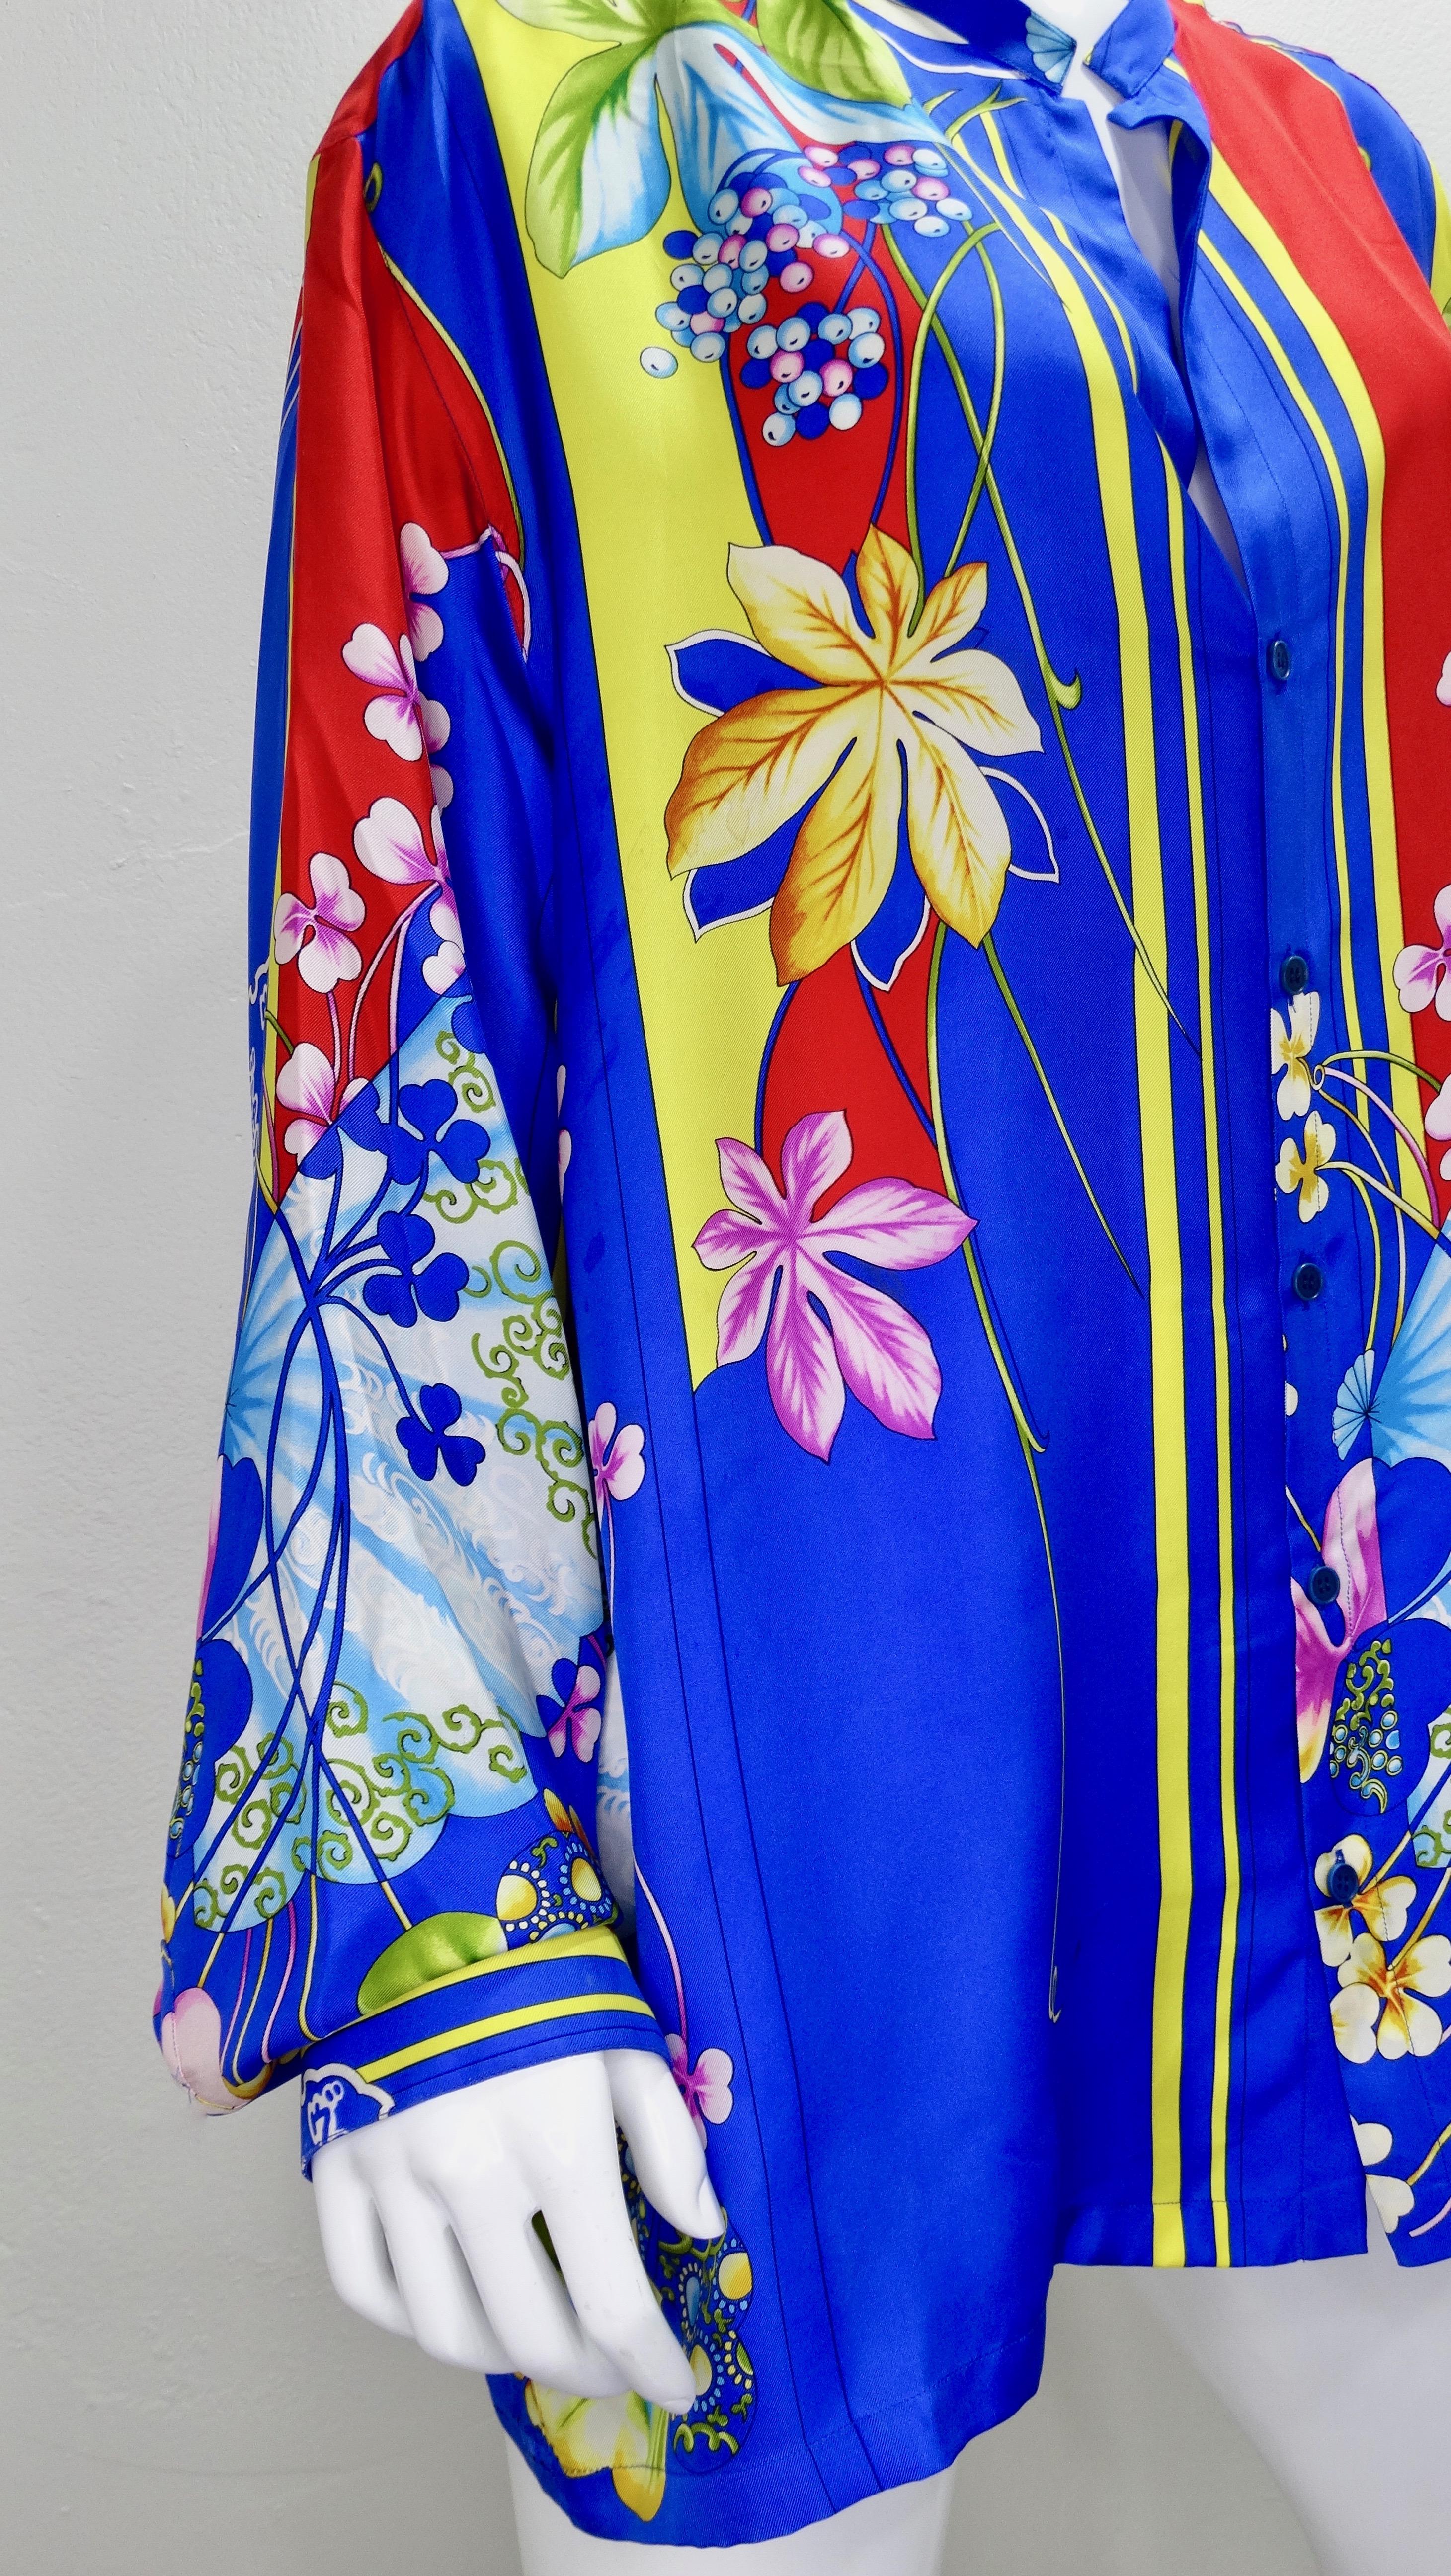 Snag yourself a piece from the Versace archives! Circa 1990s, this colorful Silk button down shirt features a vibrant Japanese inspired motif with flowers/plants indigenous to Japan, traditional folding fans, and Japanese symbols. Includes a button